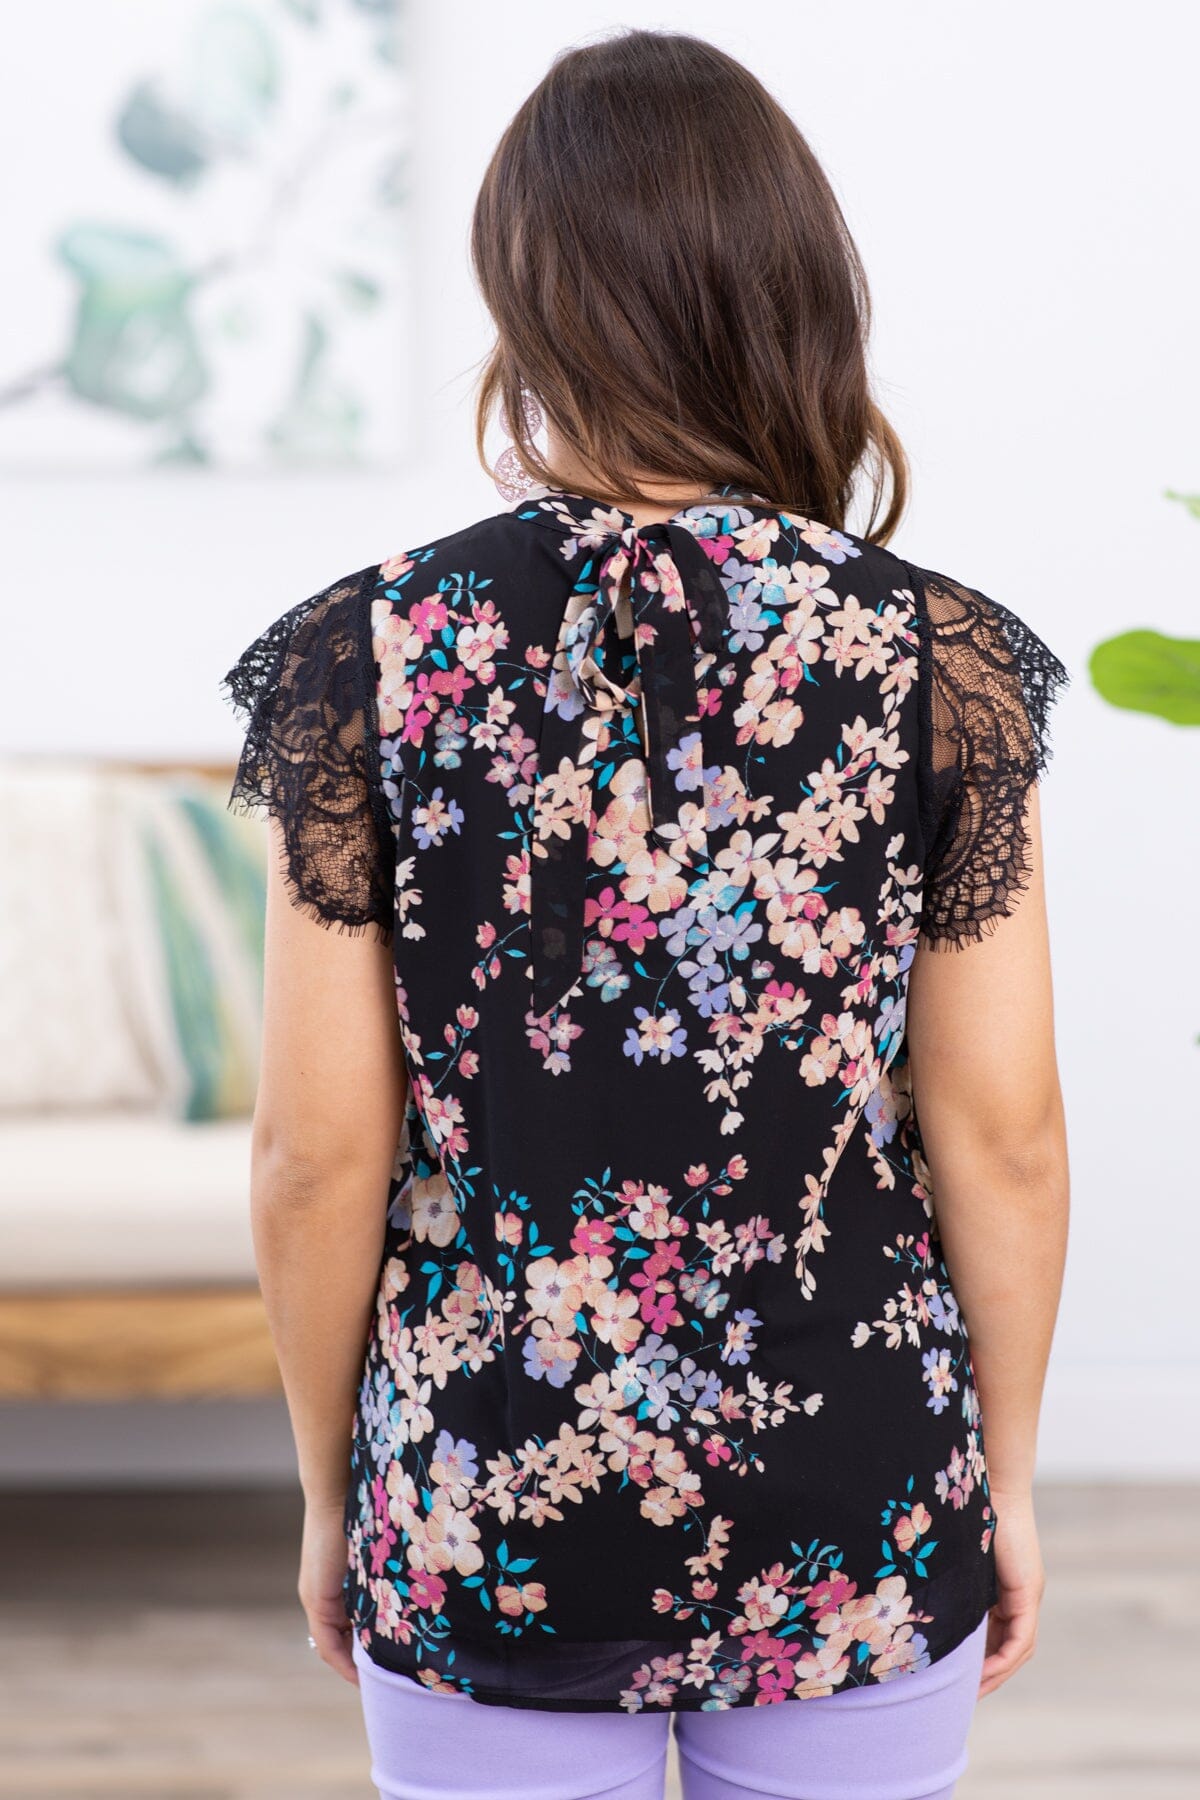 Black Multicolor Floral Top With Lace Trim - Filly Flair